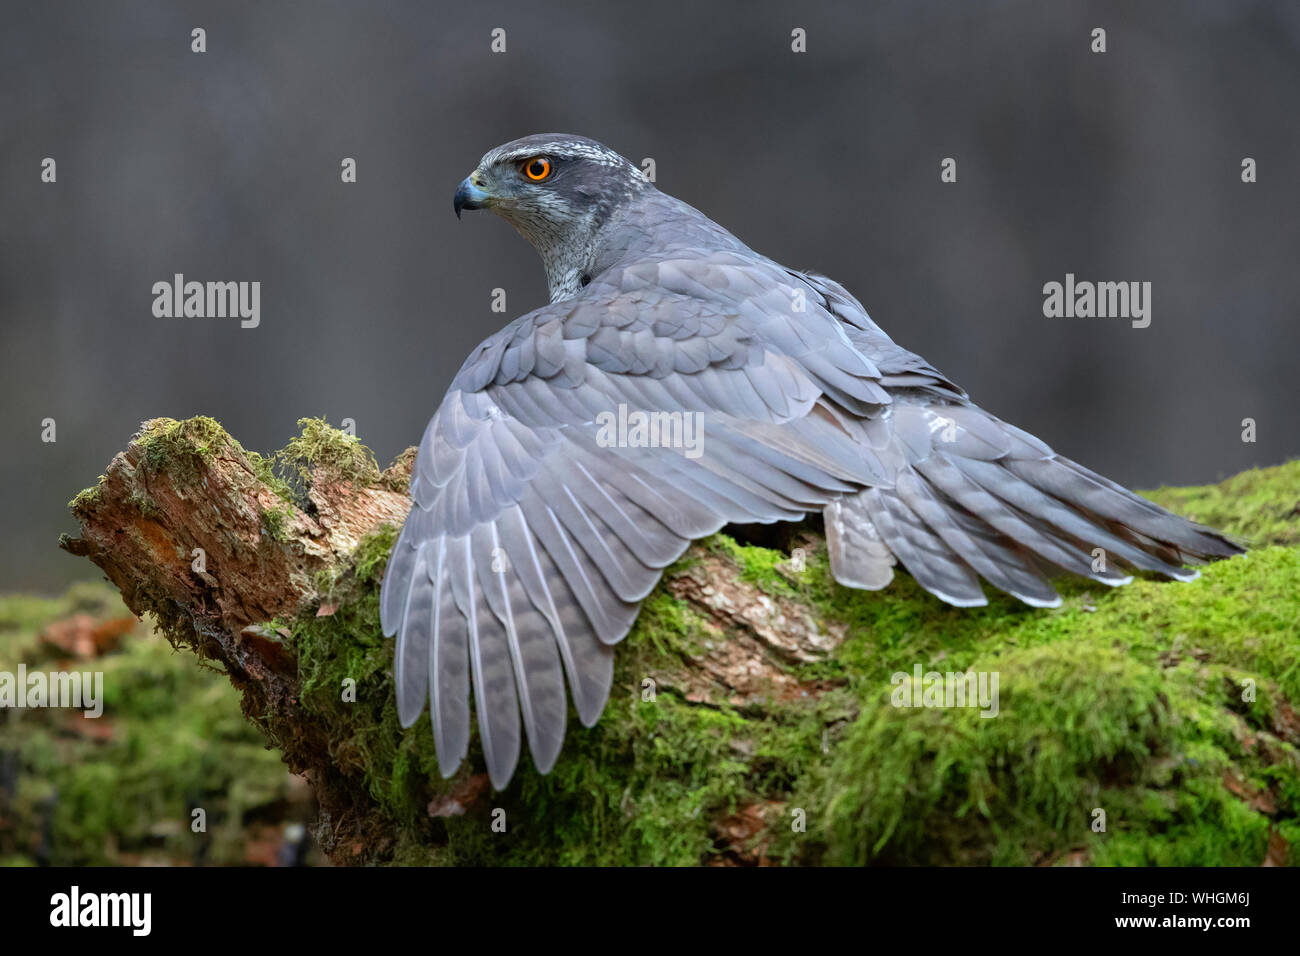 Northern Goshawk (Accipiter gentilis), side view of an adult mantling its prey Stock Photo